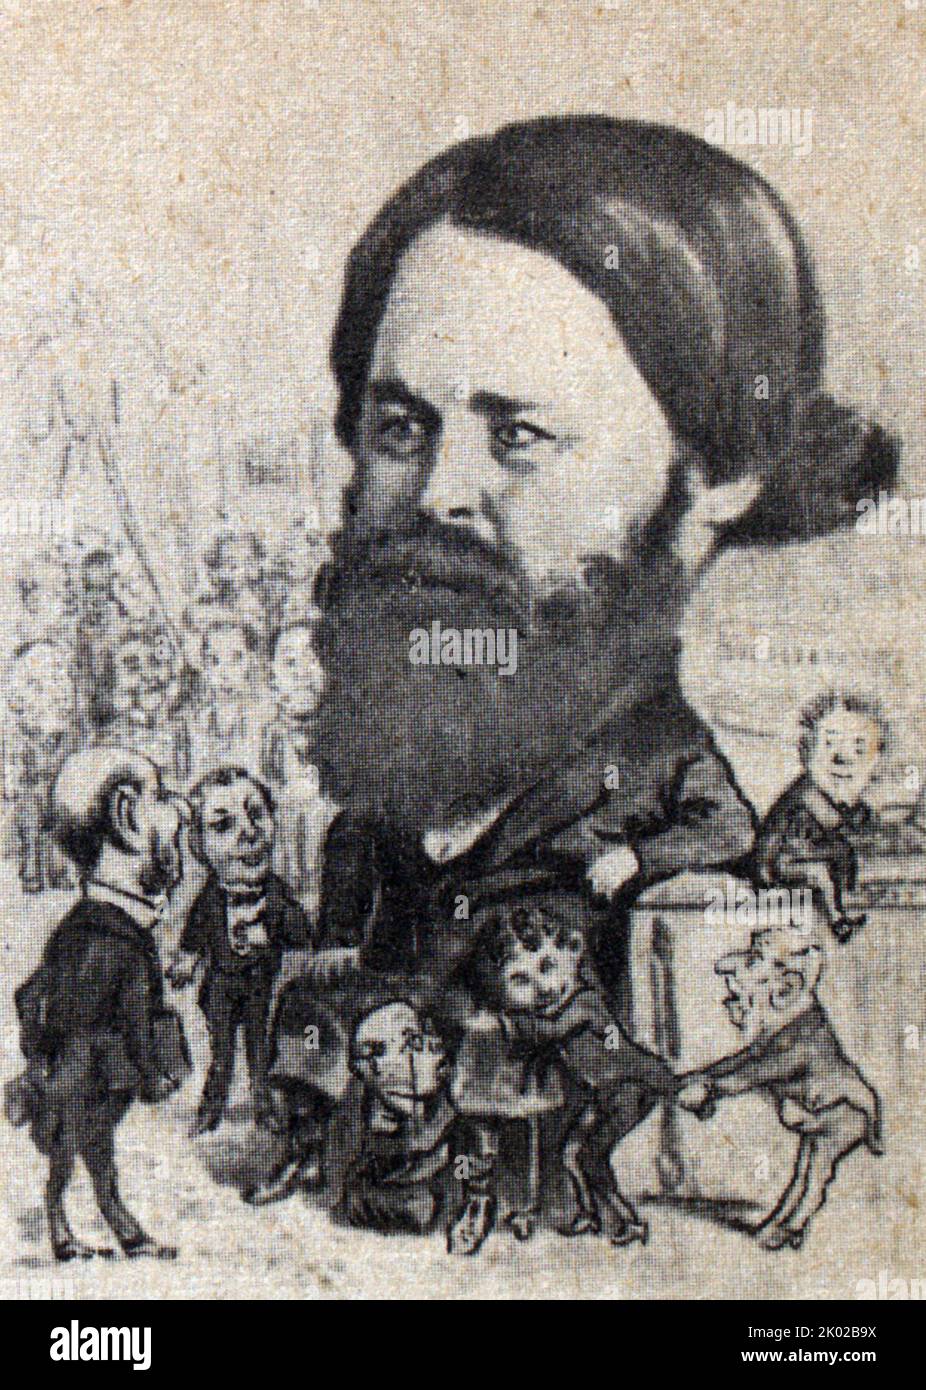 Cartoons of the second half of the 19th century on Russian capitalists: N.I. Putilov, millionaire - founder of a plant in St. Petersburg. Stock Photo